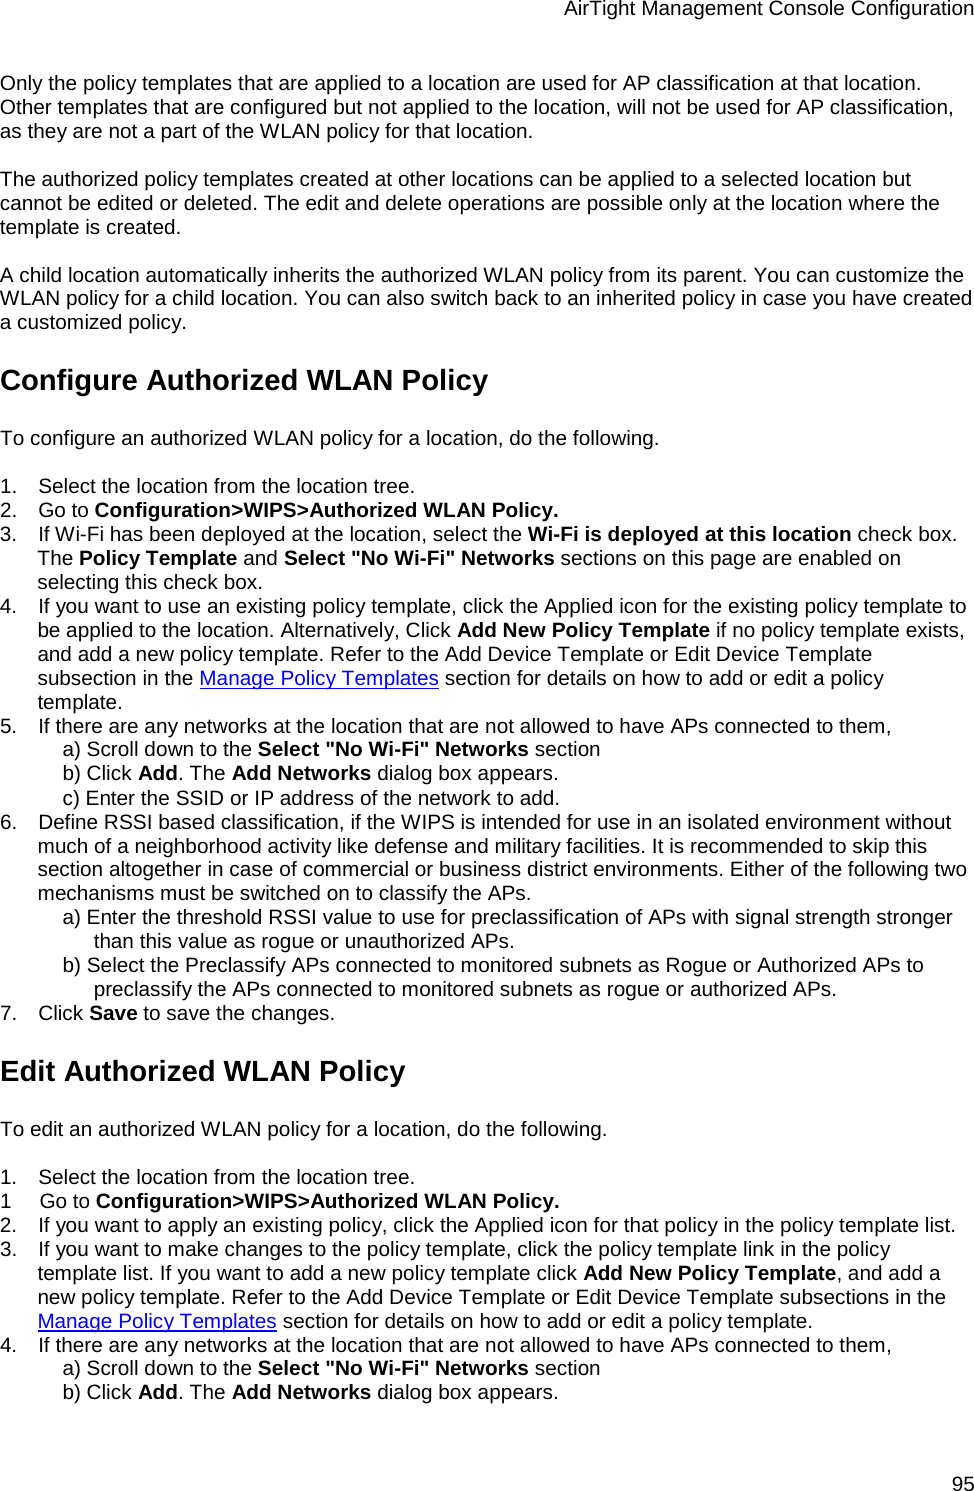 AirTight Management Console Configuration 95 Only the policy templates that are applied to a location are used for AP classification at that location. Other templates that are configured but not applied to the location, will not be used for AP classification, as they are not a part of the WLAN policy for that location.   The authorized policy templates created at other locations can be applied to a selected location but cannot be edited or deleted. The edit and delete operations are possible only at the location where the template is created.    A child location automatically inherits the authorized WLAN policy from its parent. You can customize the WLAN policy for a child location. You can also switch back to an inherited policy in case you have created a customized policy. Configure Authorized WLAN Policy To configure an authorized WLAN policy for a location, do the following.   1.      Select the location from the location tree. 2.      Go to Configuration&gt;WIPS&gt;Authorized WLAN Policy. 3.      If Wi-Fi has been deployed at the location, select the Wi-Fi is deployed at this location check box. The Policy Template and Select &quot;No Wi-Fi&quot; Networks sections on this page are enabled on selecting this check box. 4.      If you want to use an existing policy template, click the Applied icon for the existing policy template to be applied to the location. Alternatively, Click Add New Policy Template if no policy template exists, and add a new policy template. Refer to the Add Device Template or Edit Device Template subsection in the Manage Policy Templates section for details on how to add or edit a policy template. 5.      If there are any networks at the location that are not allowed to have APs connected to them,  a) Scroll down to the Select &quot;No Wi-Fi&quot; Networks section b) Click Add. The Add Networks dialog box appears. c) Enter the SSID or IP address of the network to add. 6.      Define RSSI based classification, if the WIPS is intended for use in an isolated environment without much of a neighborhood activity like defense and military facilities. It is recommended to skip this section altogether in case of commercial or business district environments. Either of the following two mechanisms must be switched on to classify the APs. a) Enter the threshold RSSI value to use for preclassification of APs with signal strength stronger than this value as rogue or unauthorized APs. b) Select the Preclassify APs connected to monitored subnets as Rogue or Authorized APs to preclassify the APs connected to monitored subnets as rogue or authorized APs. 7.      Click Save to save the changes. Edit Authorized WLAN Policy To edit an authorized WLAN policy for a location, do the following.   1.      Select the location from the location tree. 1        Go to Configuration&gt;WIPS&gt;Authorized WLAN Policy. 2.      If you want to apply an existing policy, click the Applied icon for that policy in the policy template list. 3.      If you want to make changes to the policy template, click the policy template link in the policy template list. If you want to add a new policy template click Add New Policy Template, and add a new policy template. Refer to the Add Device Template or Edit Device Template subsections in the Manage Policy Templates section for details on how to add or edit a policy template. 4.      If there are any networks at the location that are not allowed to have APs connected to them,  a) Scroll down to the Select &quot;No Wi-Fi&quot; Networks section b) Click Add. The Add Networks dialog box appears. 